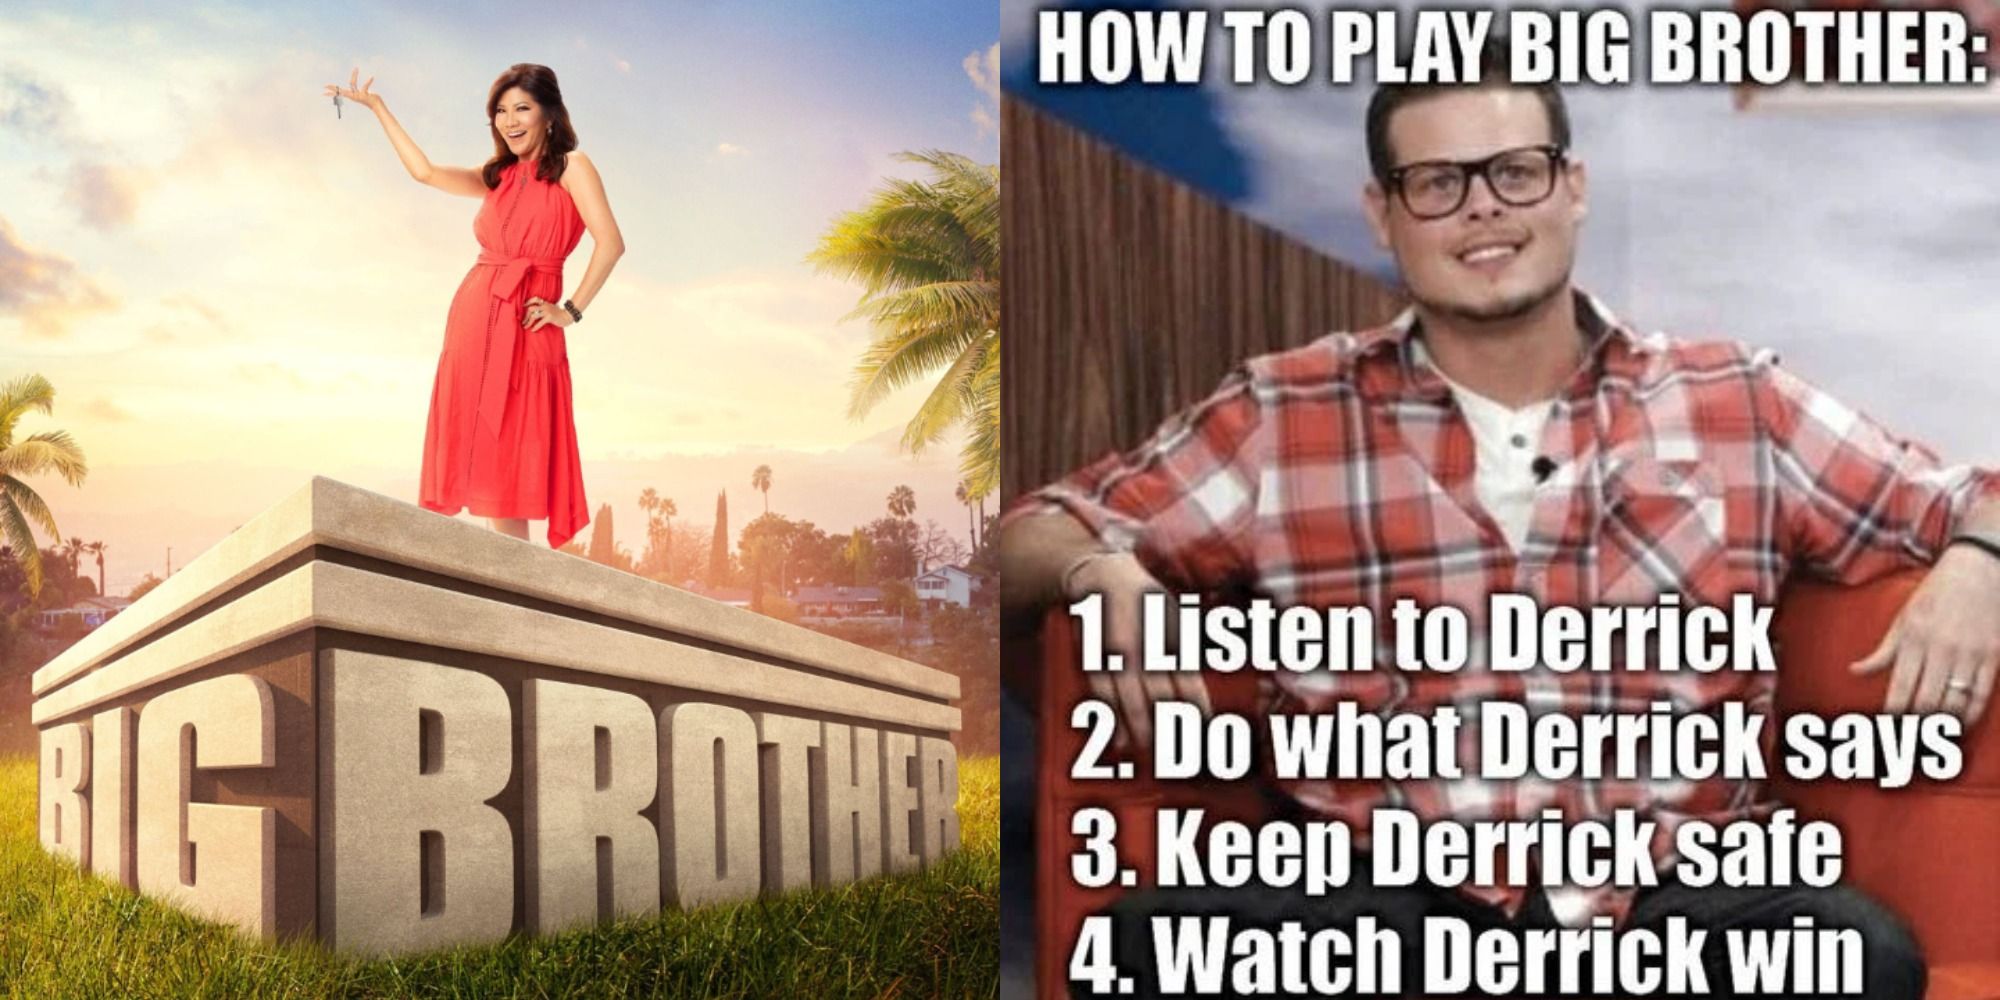 Big Brother 10 Memes That Perfectly Sum Up The Show